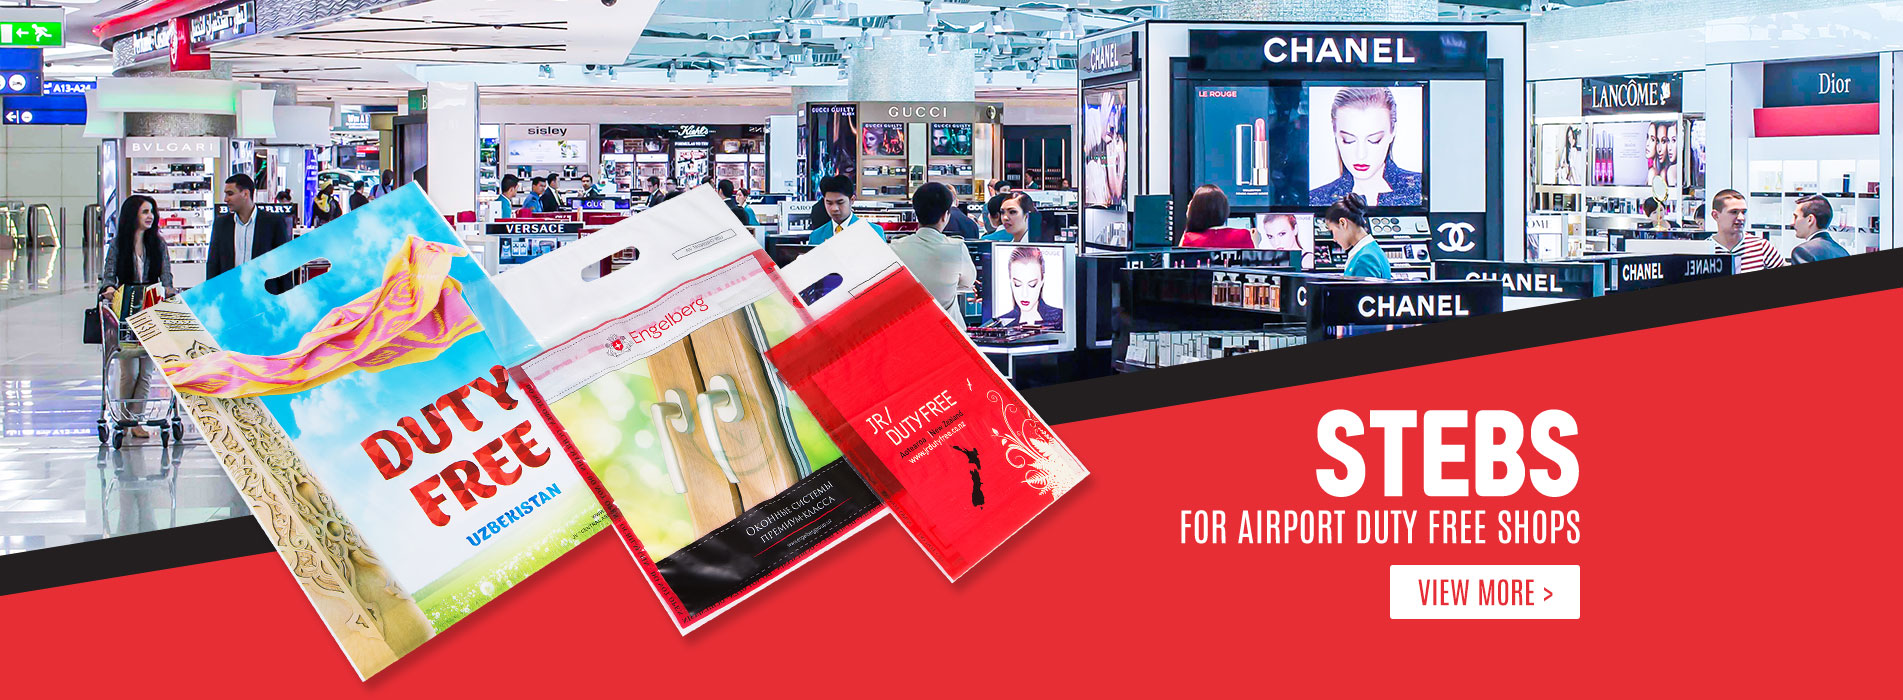 ICAO STEBs for Airport Duty Free Shops